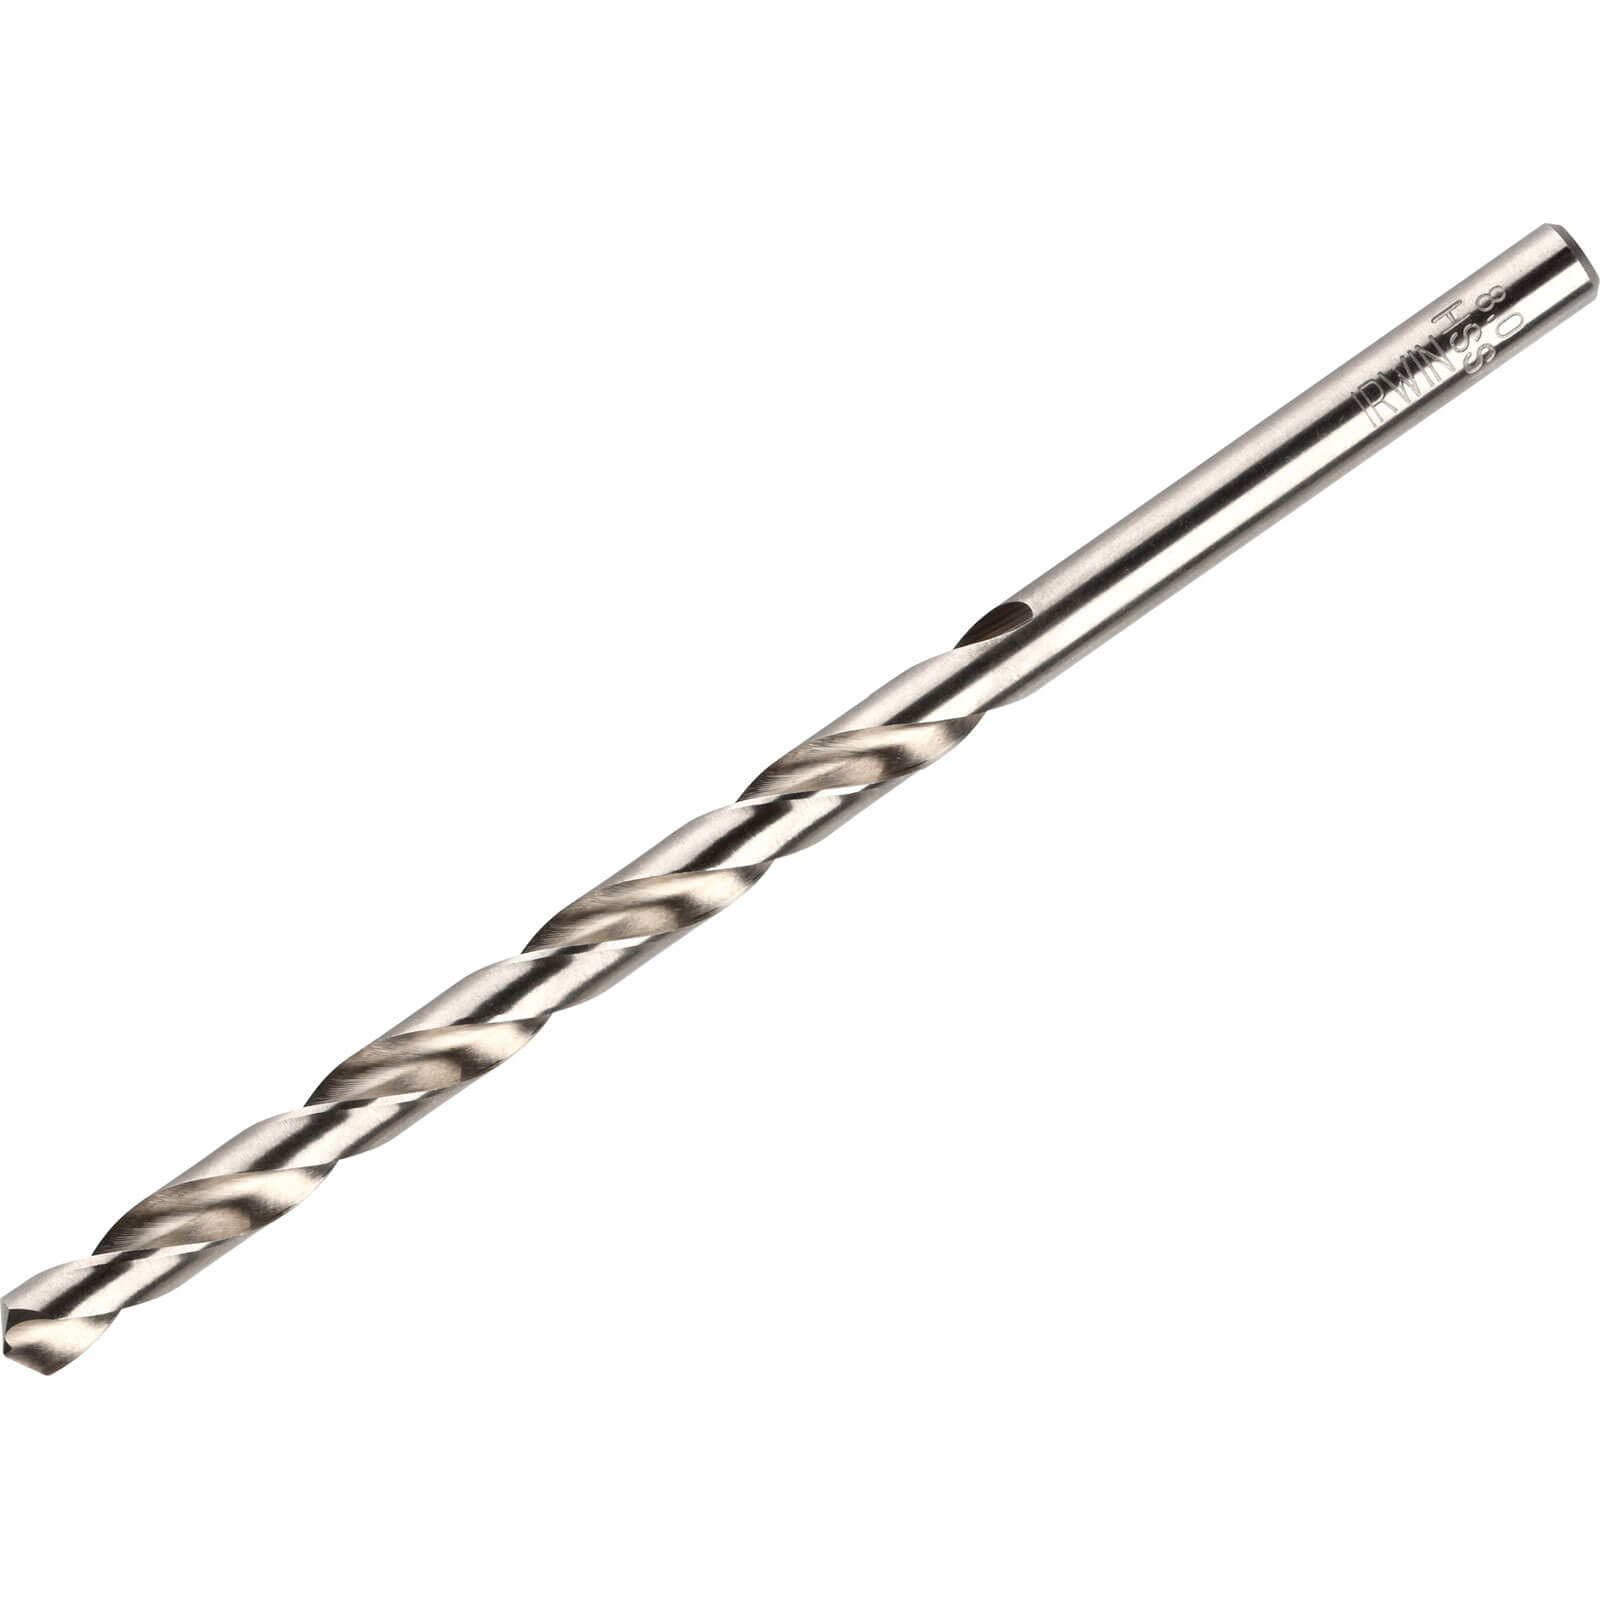 Image of Irwin HSS Long Pro Drill Bits 7mm Pack of 10